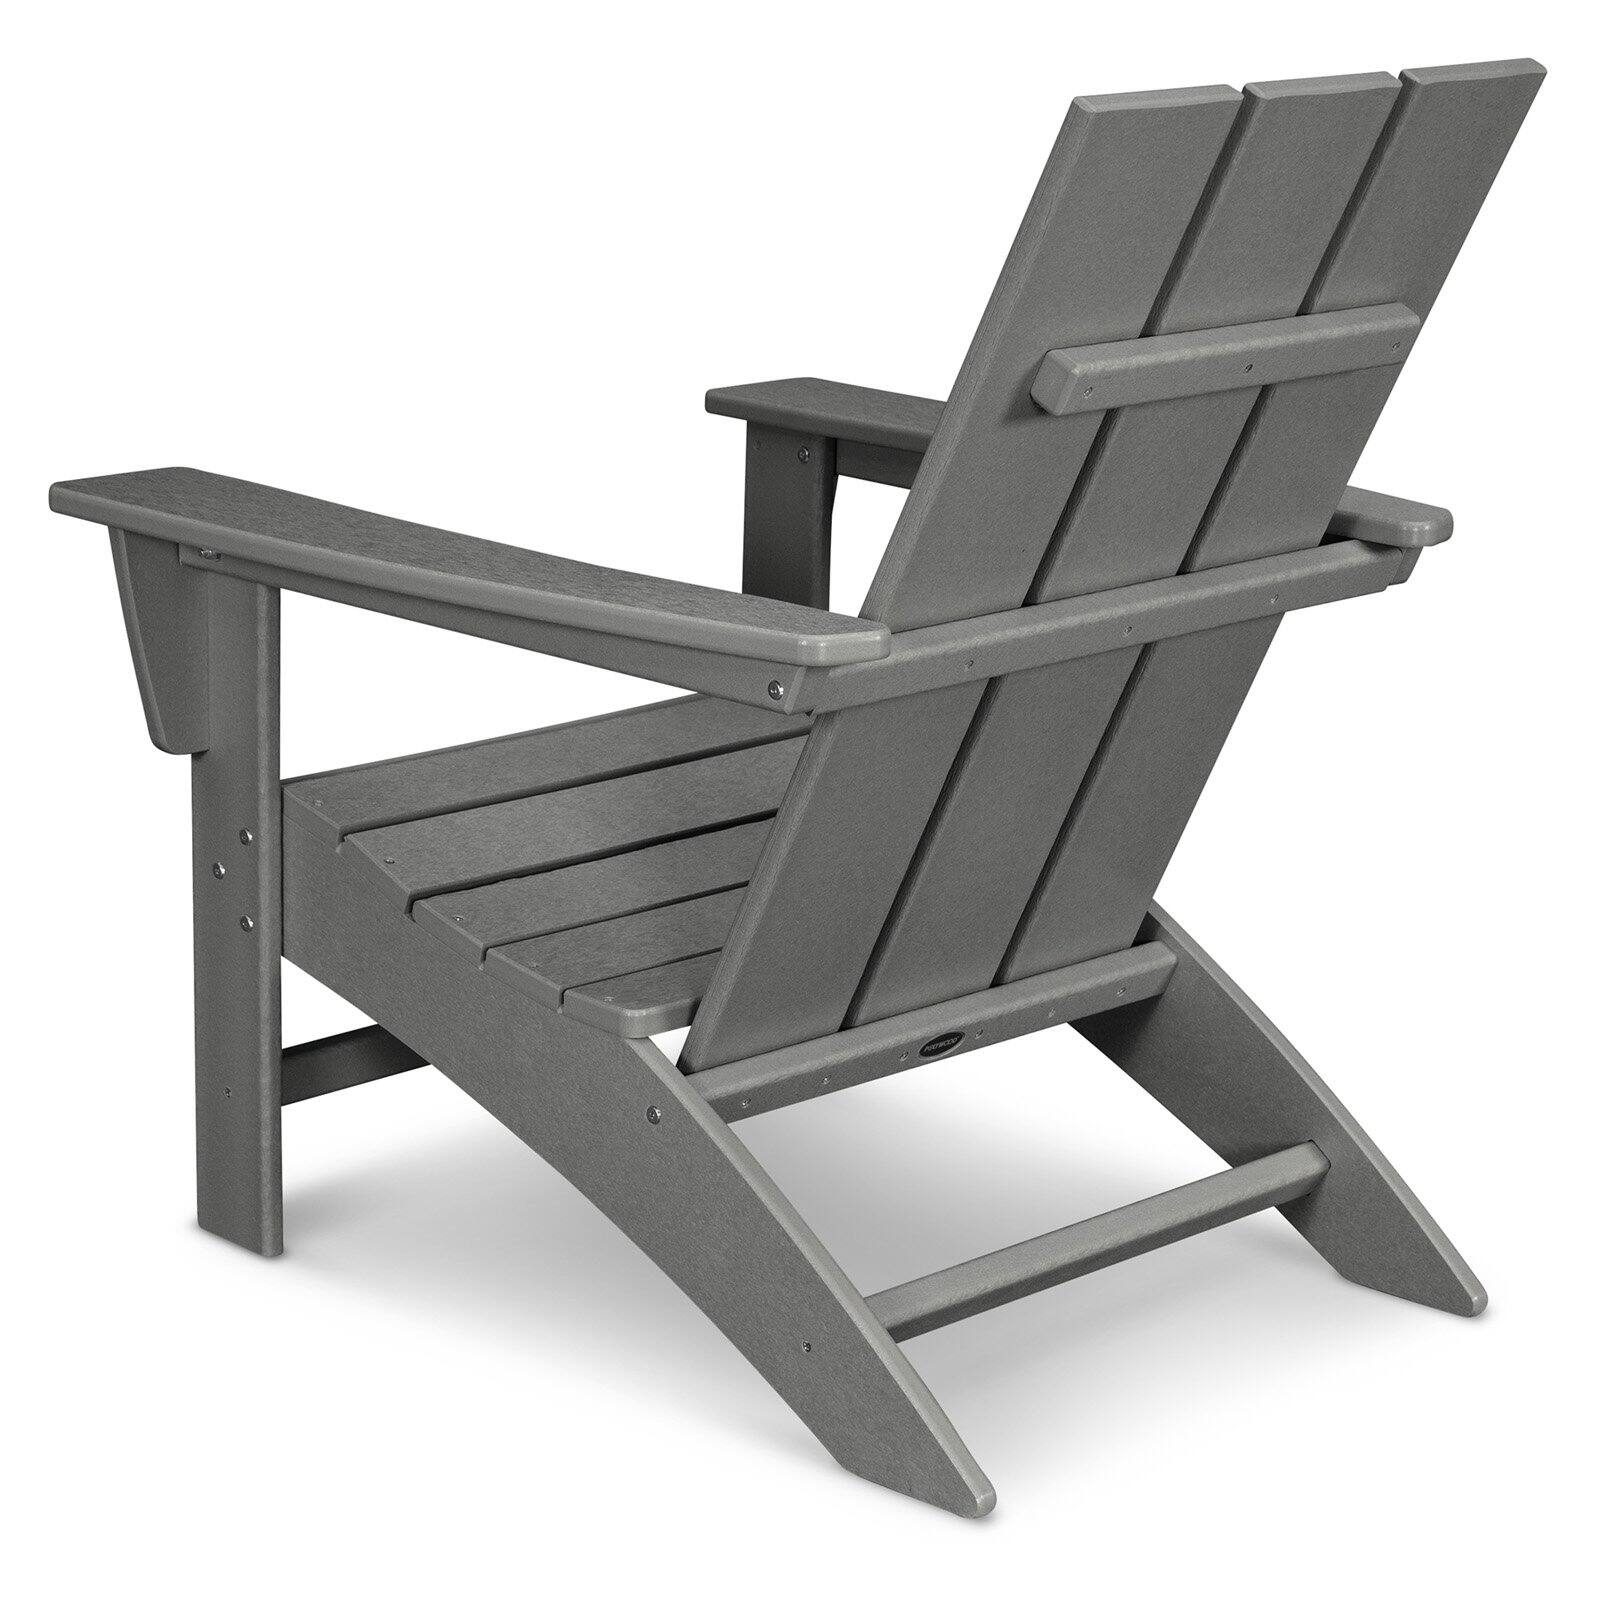 POLYWOODÂ® Modern Outdoor Adirondack Chair - image 4 of 4